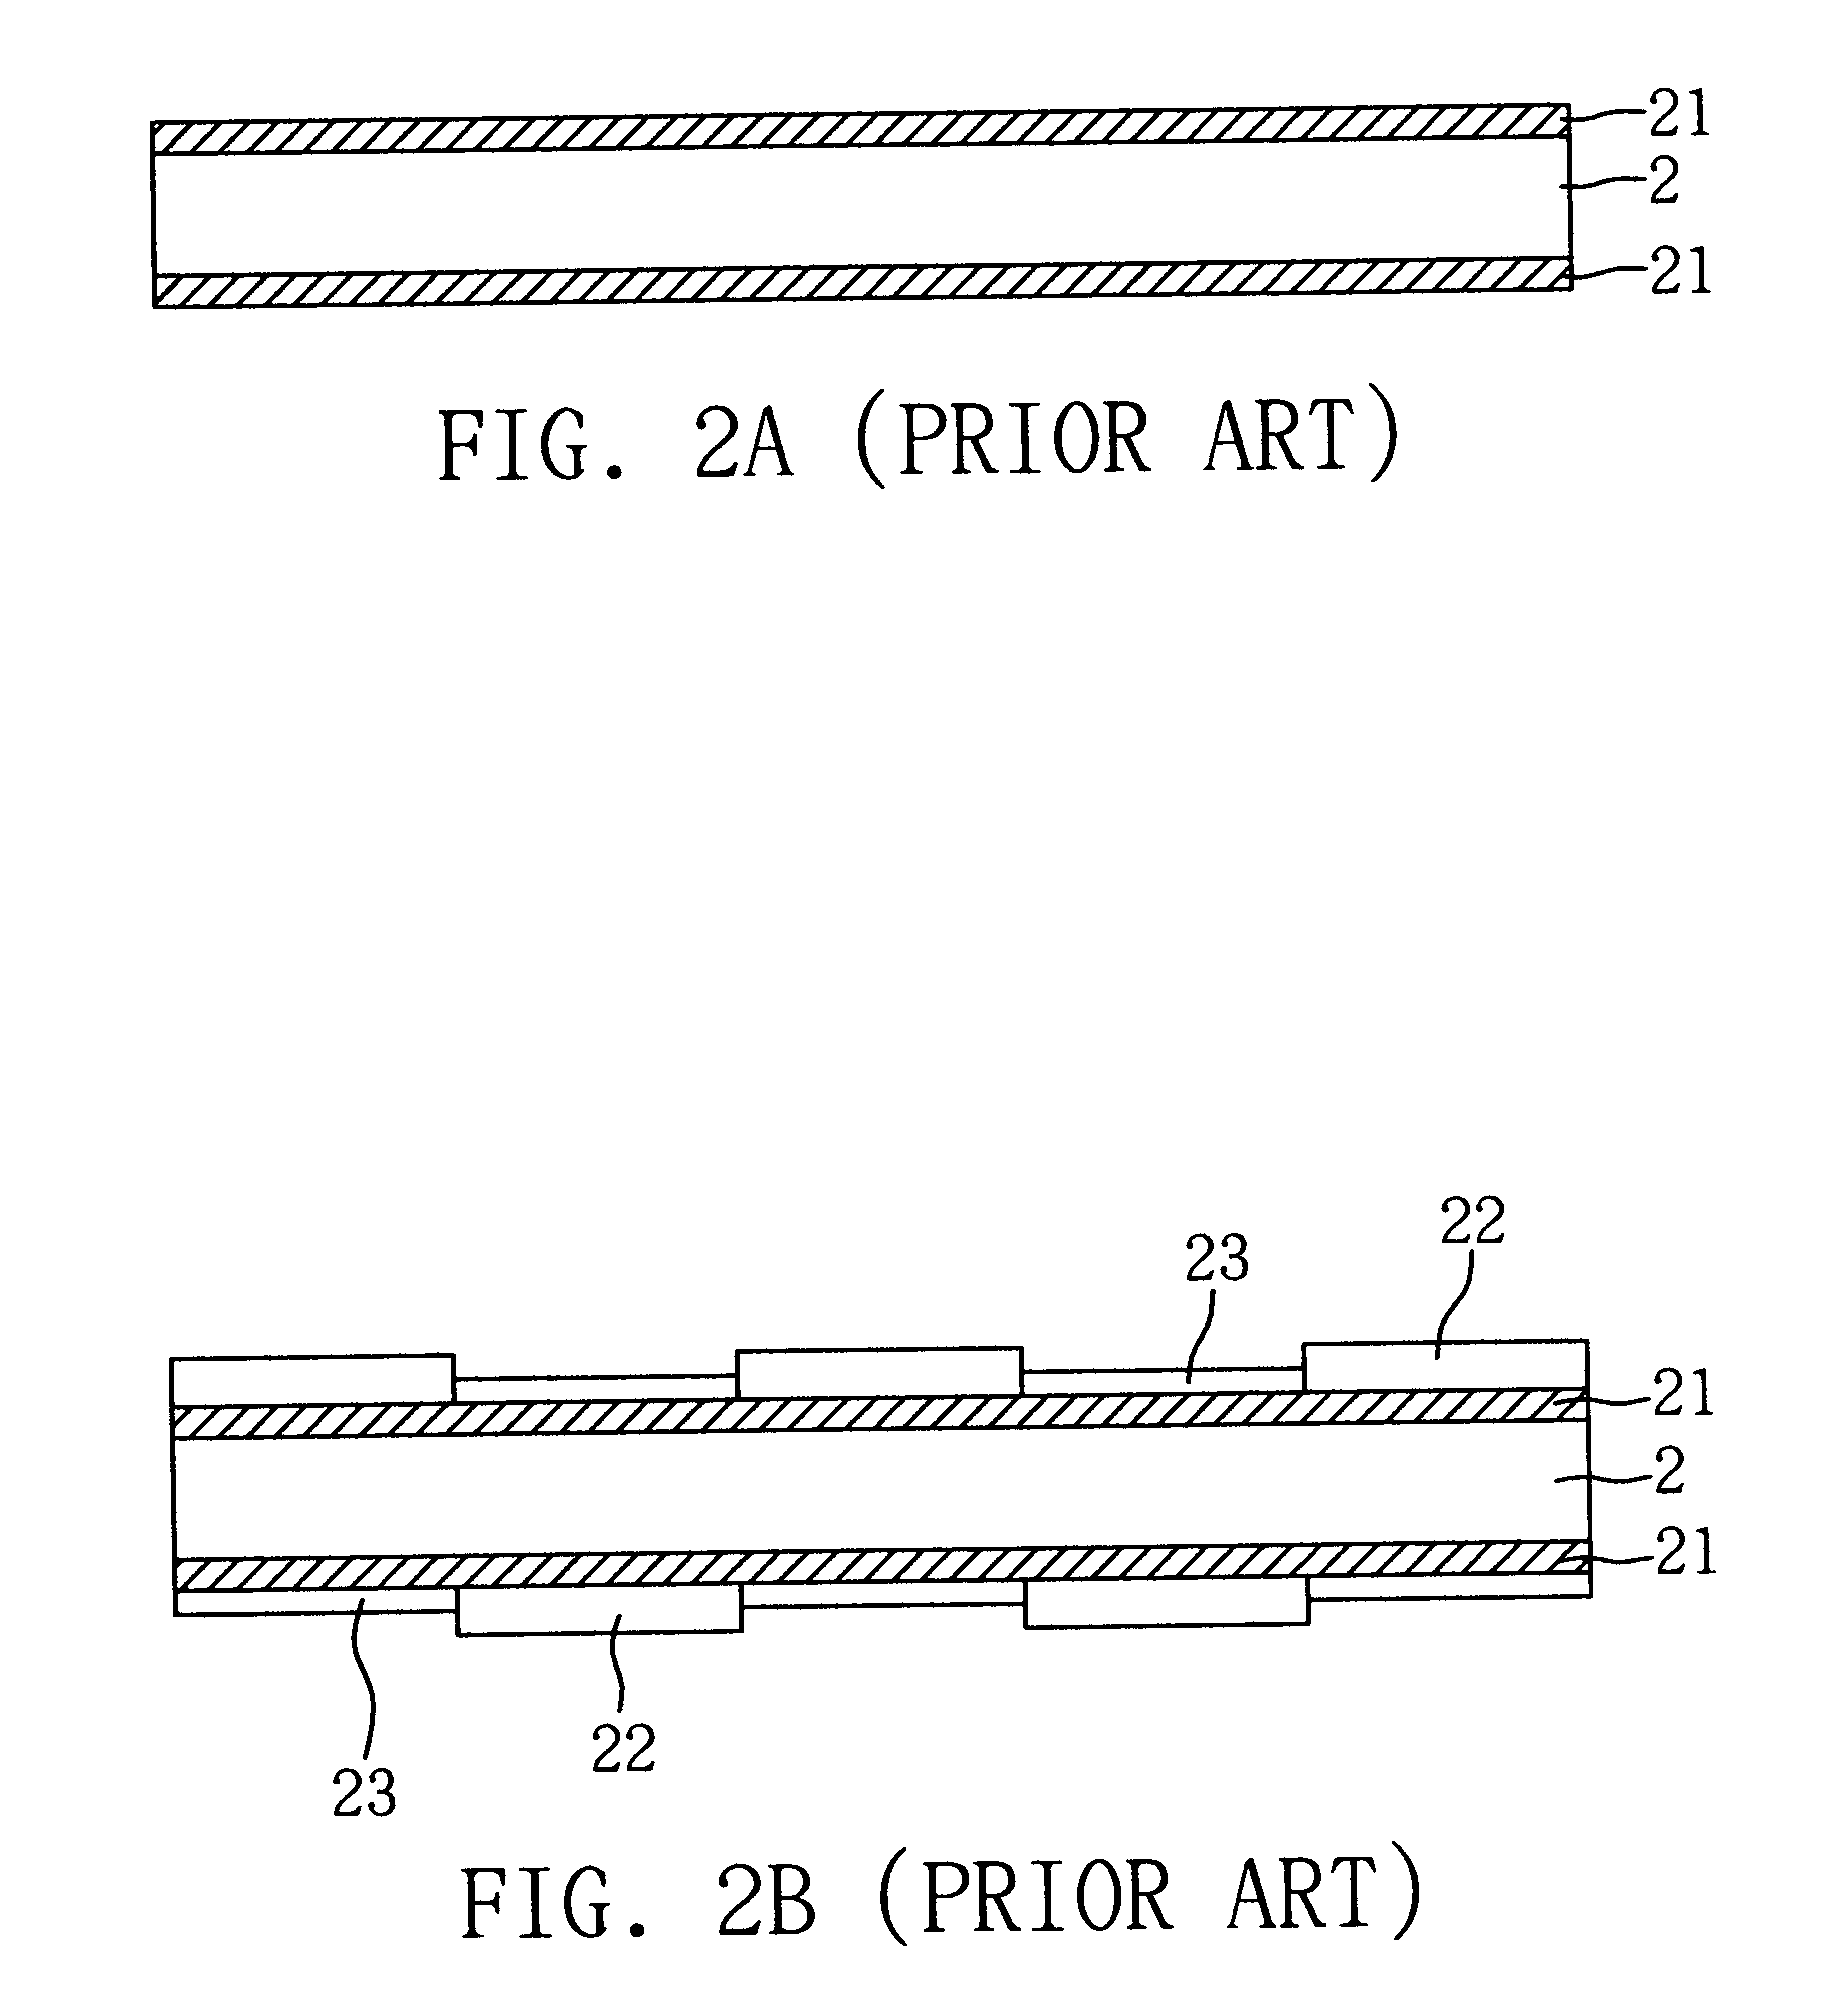 Semiconductor package substrate having bonding pads with plated layer thereon and process of manufacturing the same